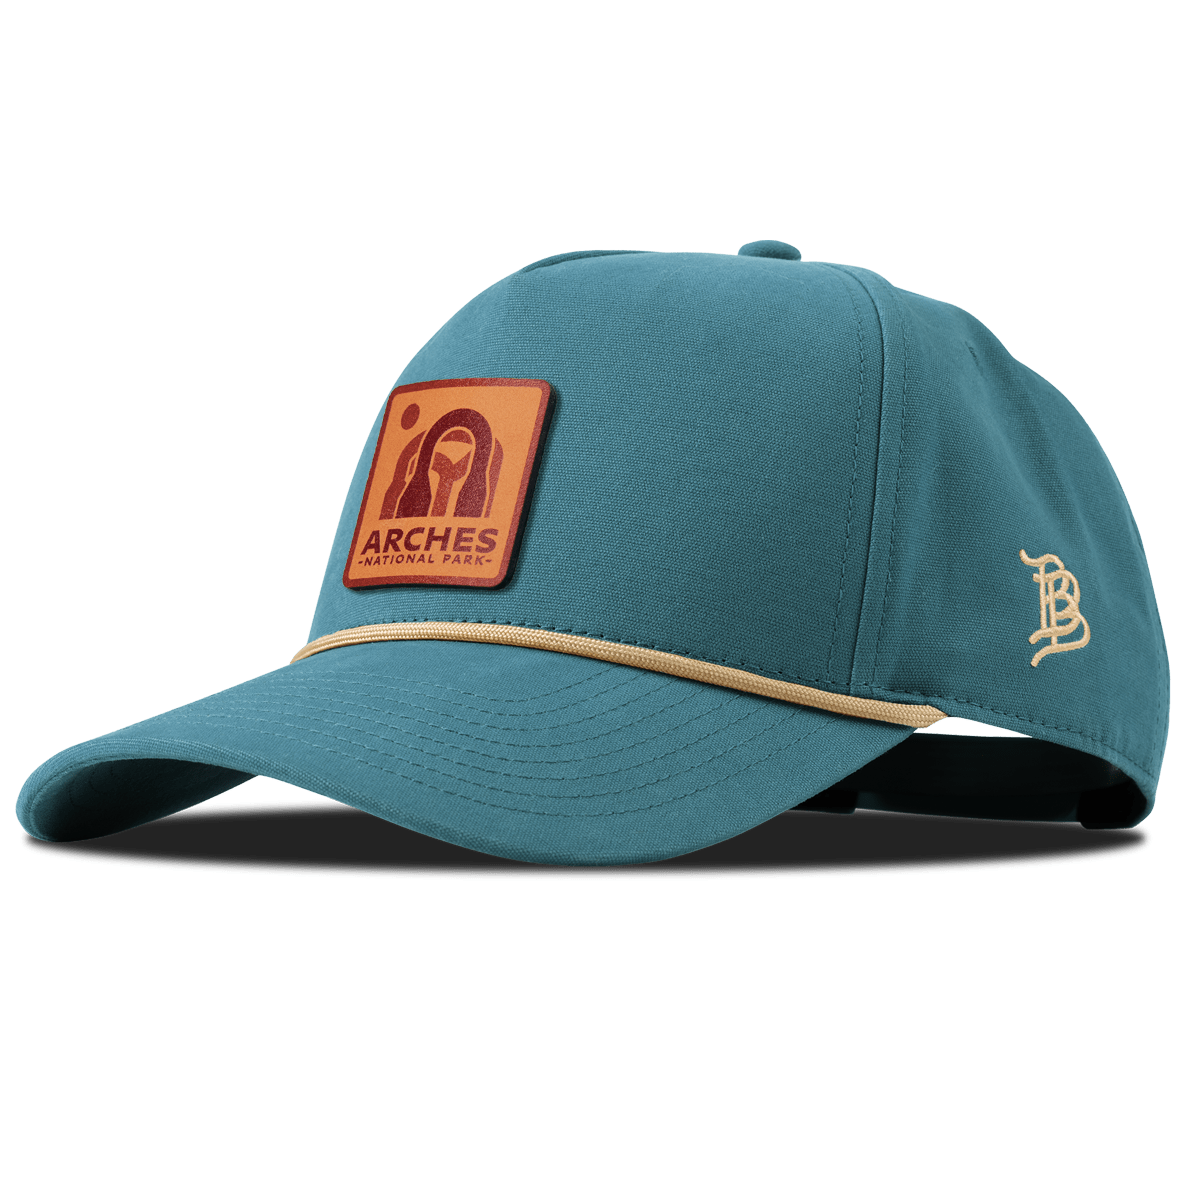 Arches National Park Canvas 5 Panel Rope